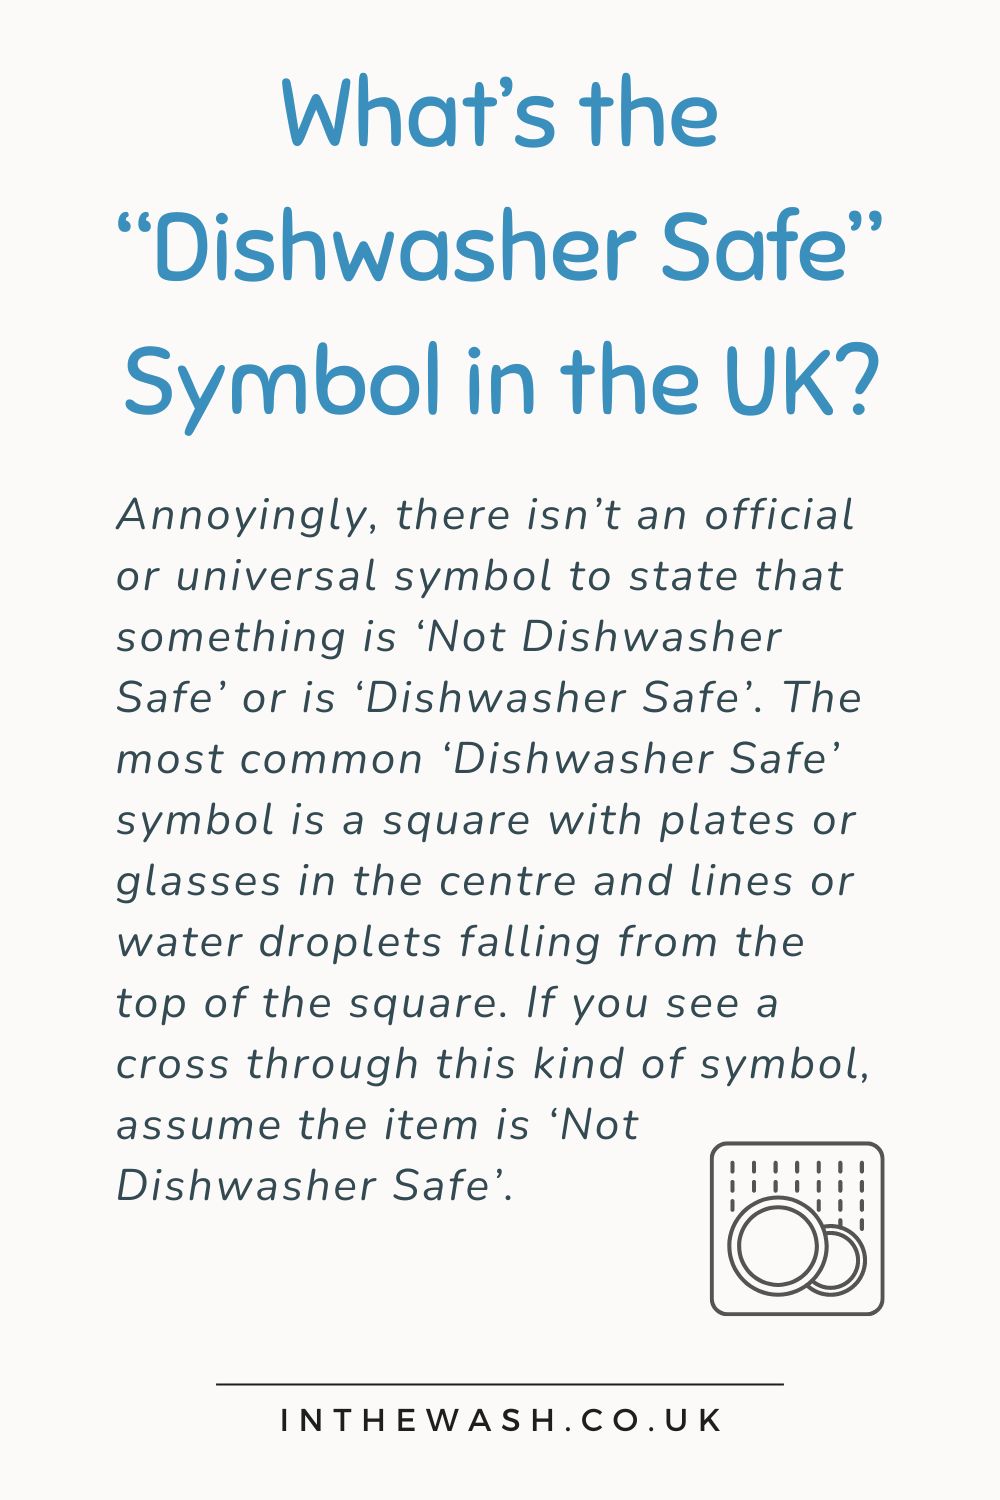 What's the "Dishwasher Safe" symbol in the UK?